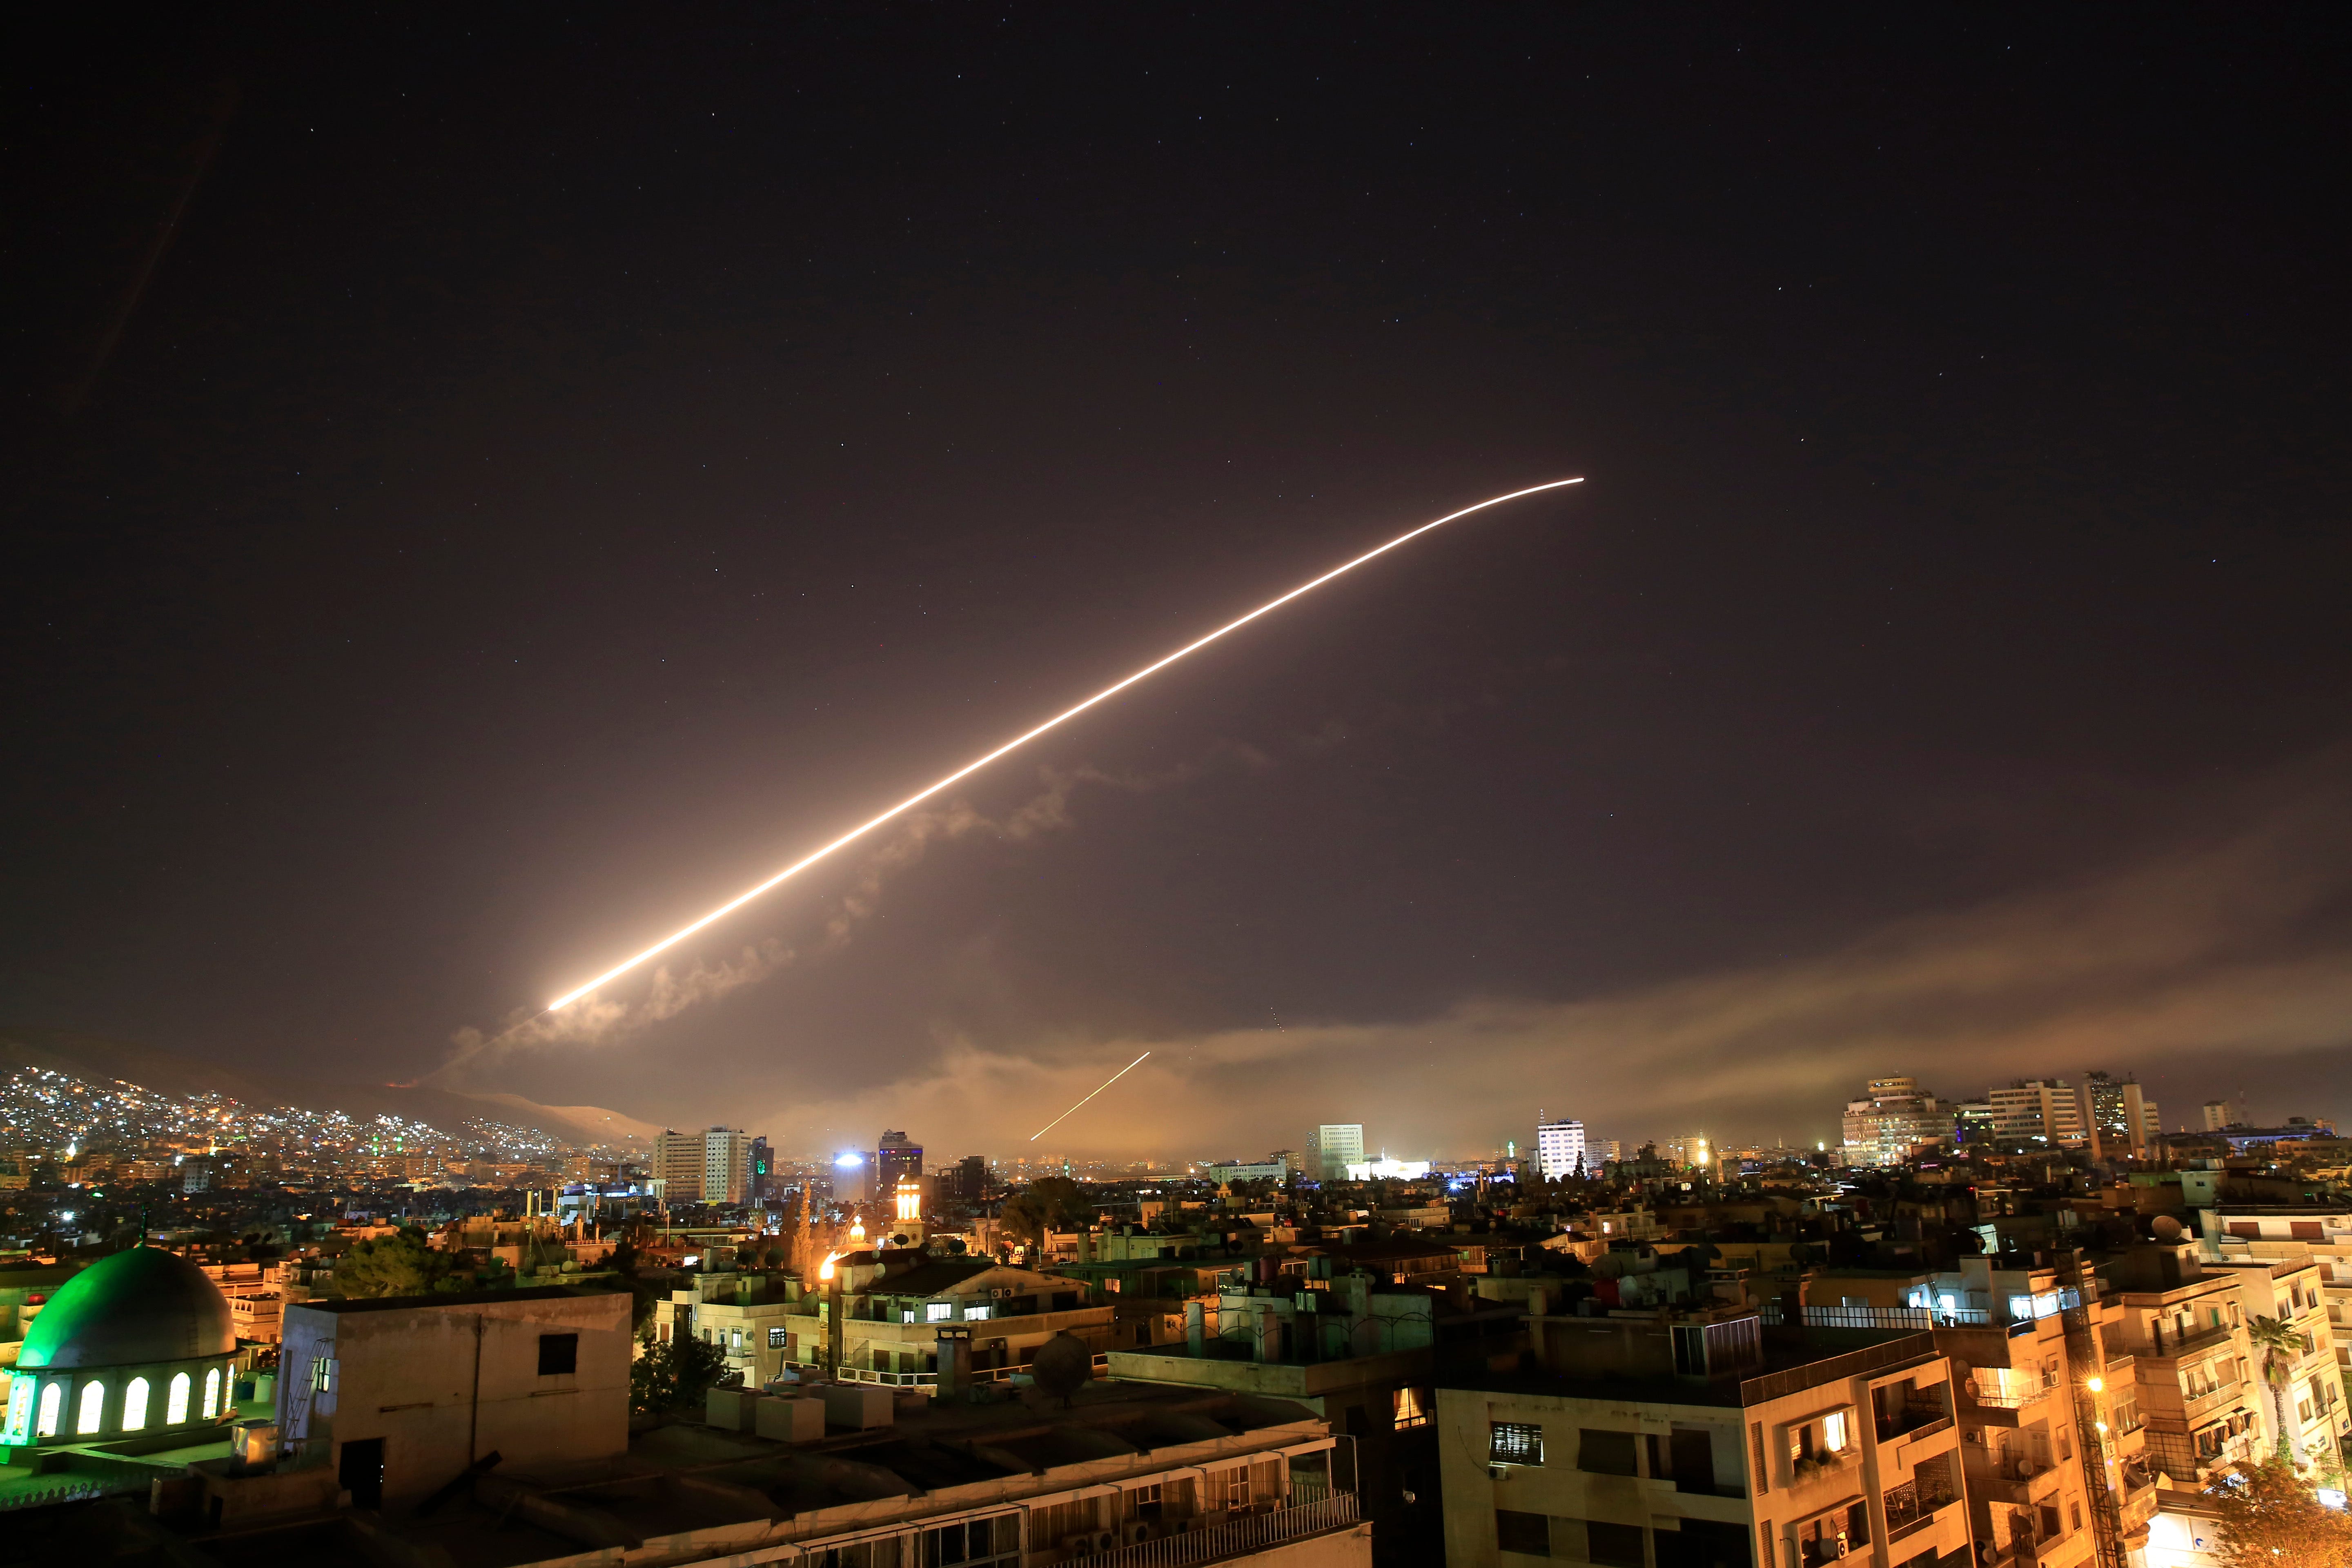 105 to 0: Why Syria&apos;s air defenses failed to intercept a single incoming missile